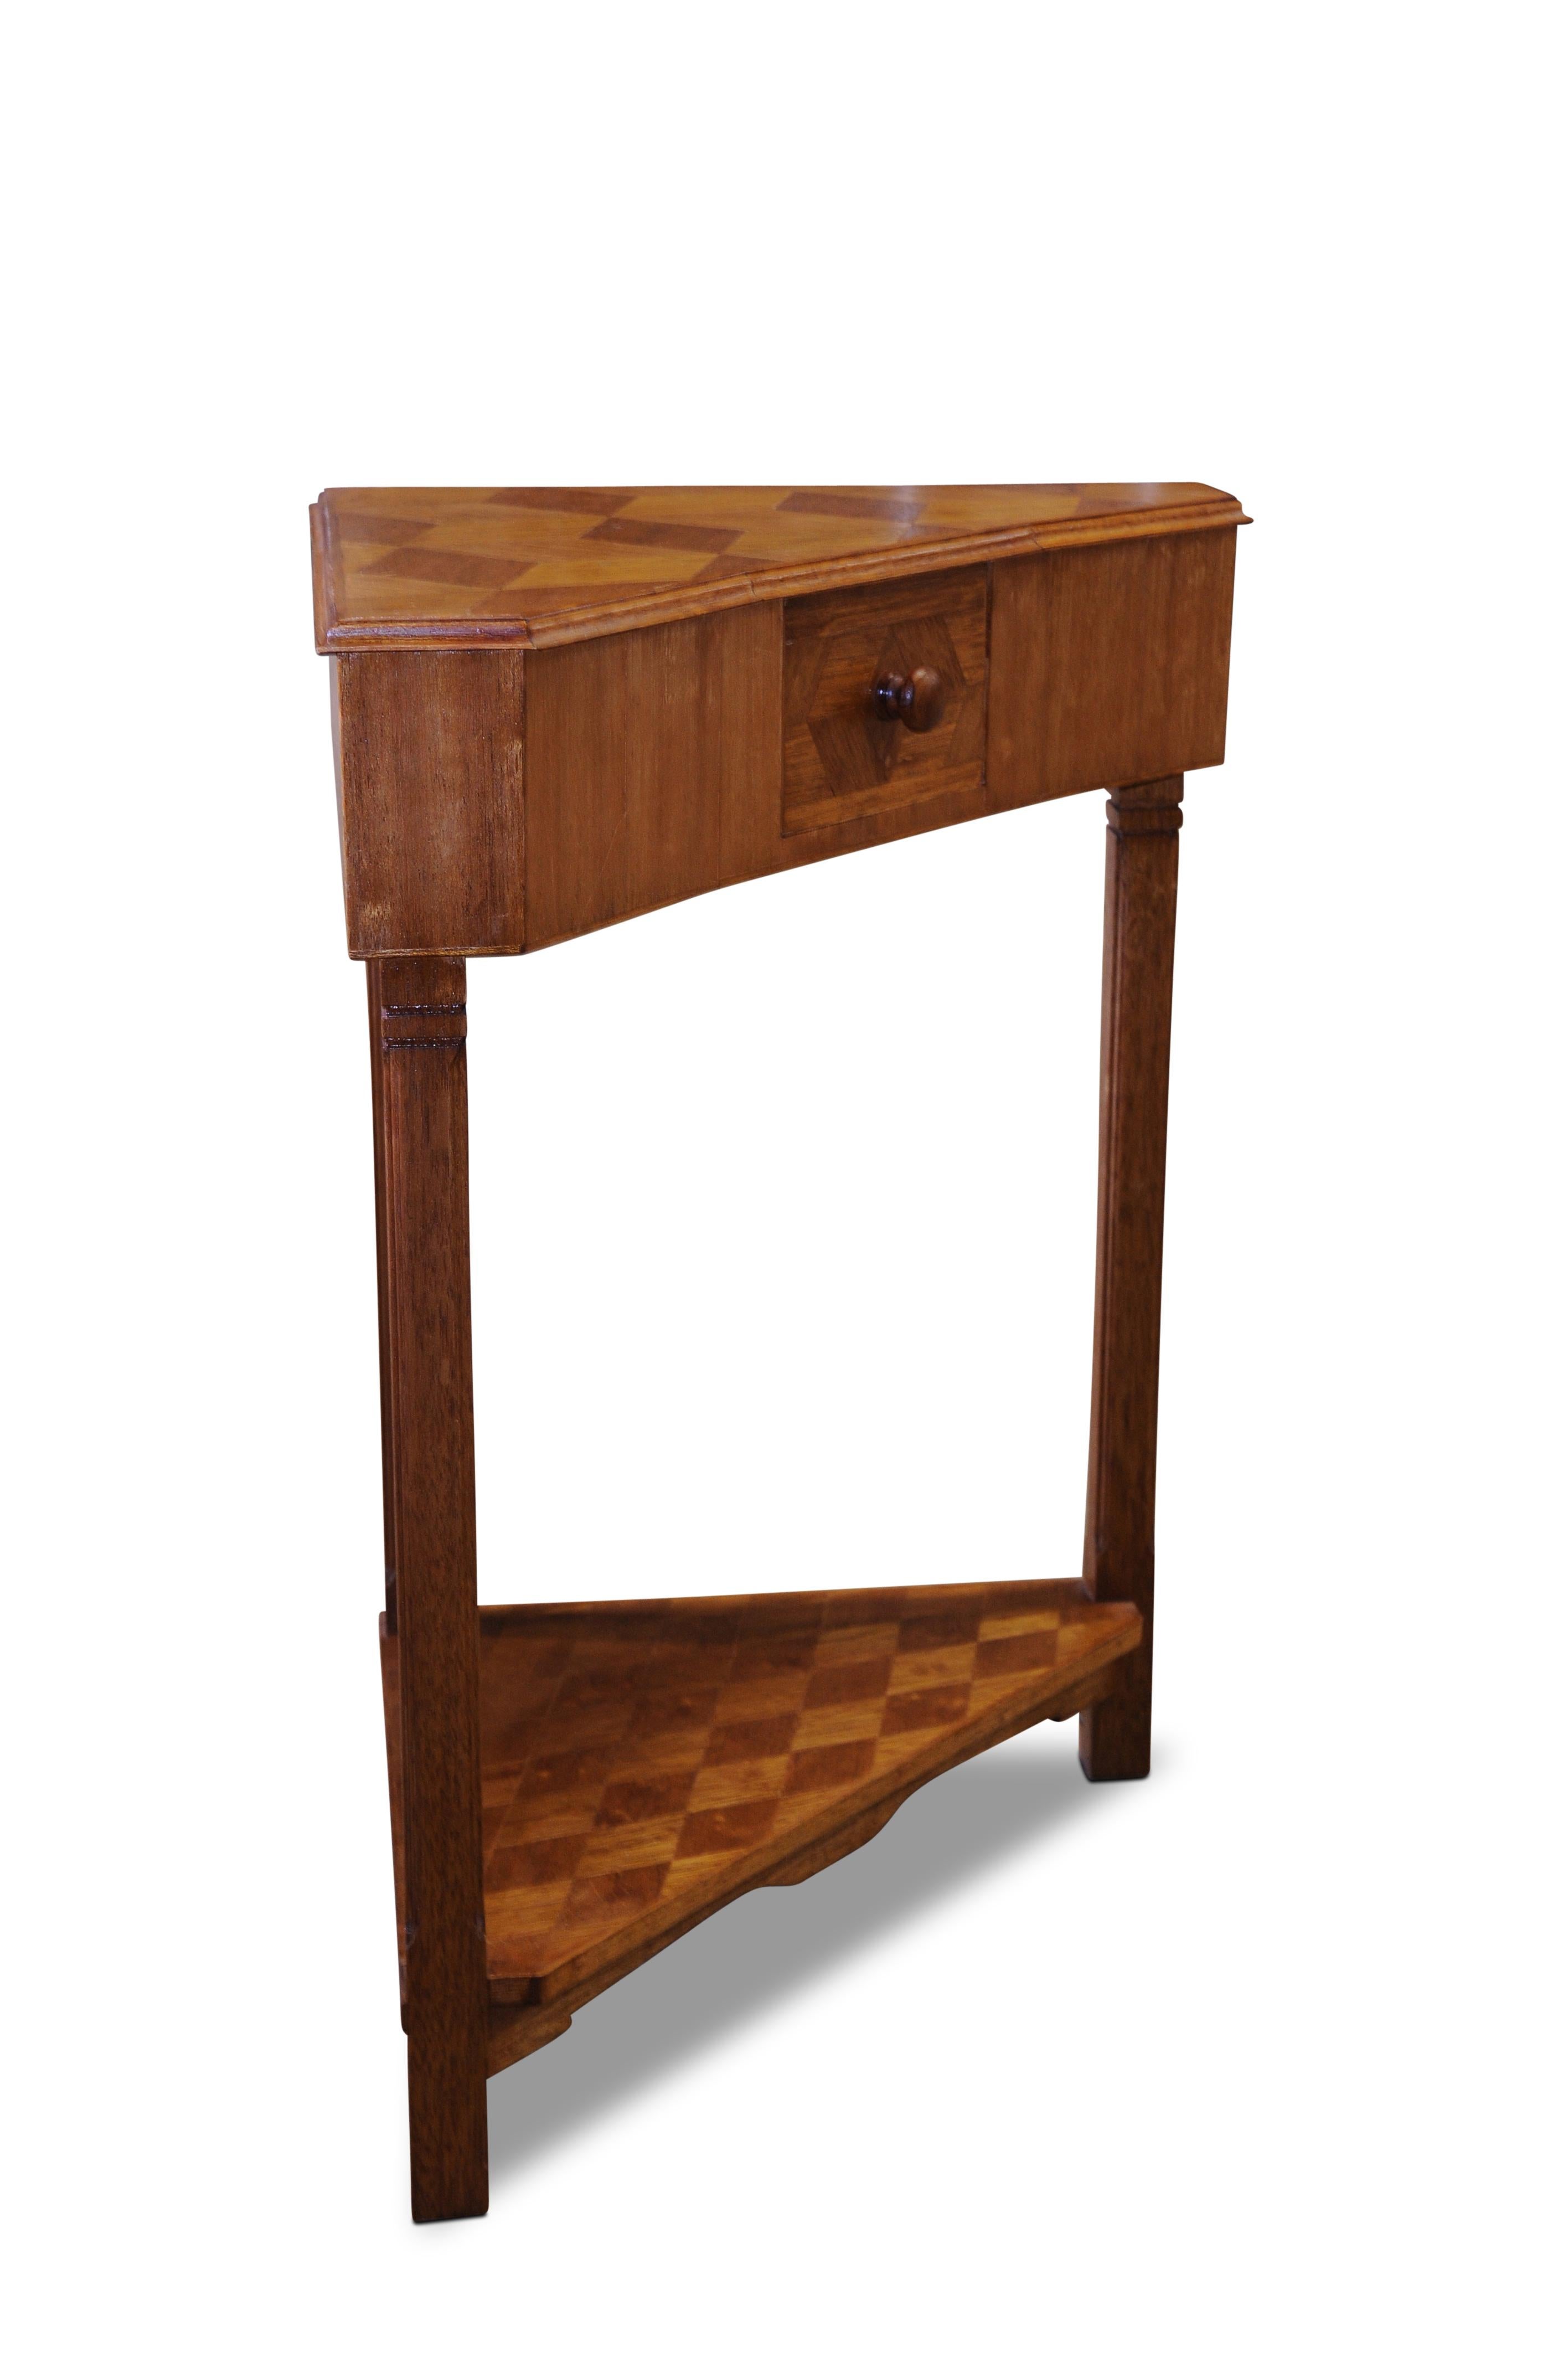 European Arts and Crafts Oak Parquetry Side Table With Single Drawer on Columnar Base. For Sale